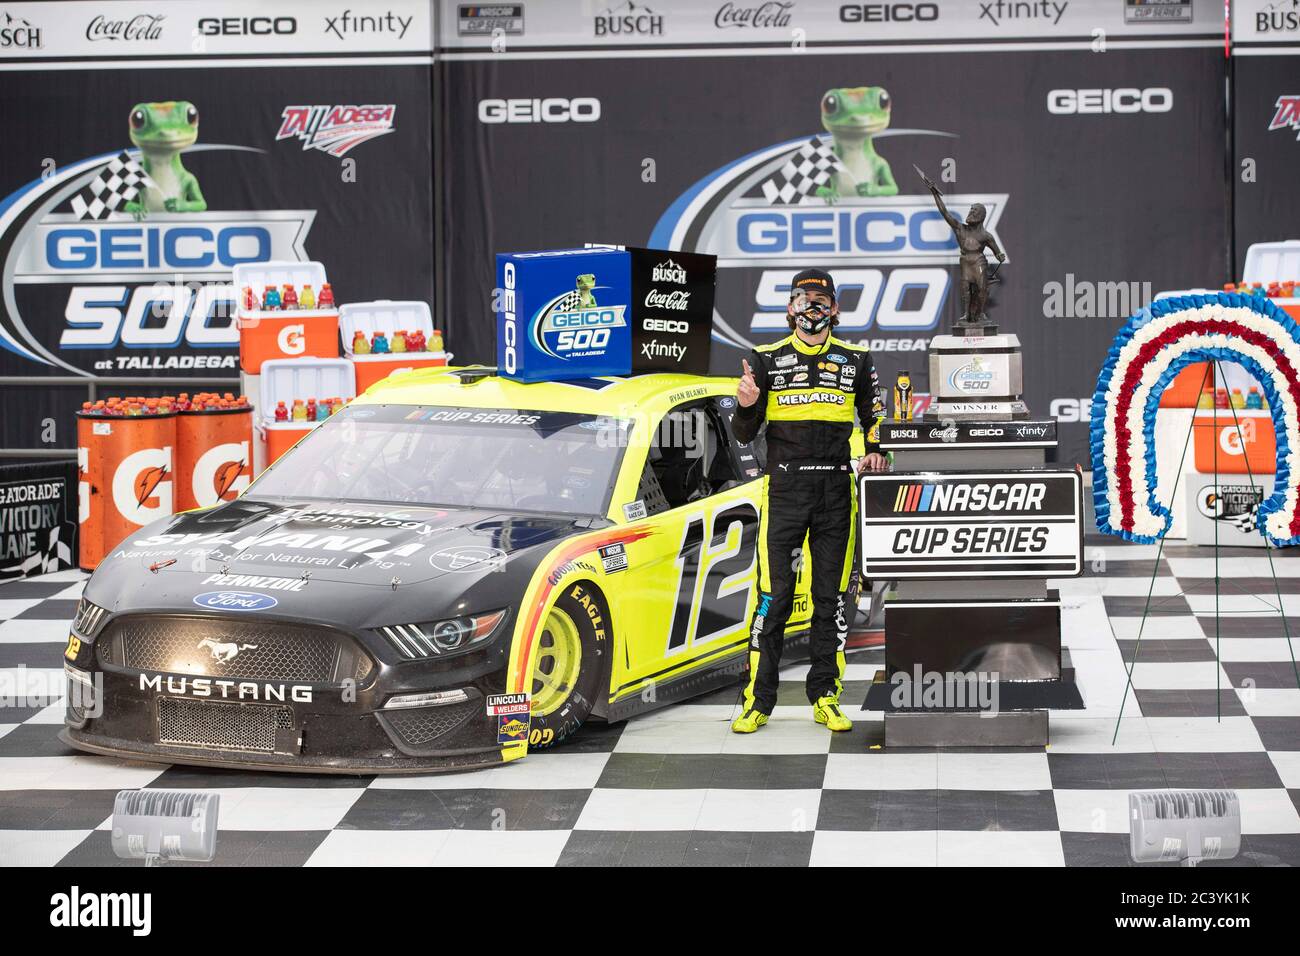 Lincoln, Alabama, USA. 22nd June, 2020. Ryan Blaney (12) wins the GEICO 500 at Talladega Superspeedway in Lincoln, Alabama